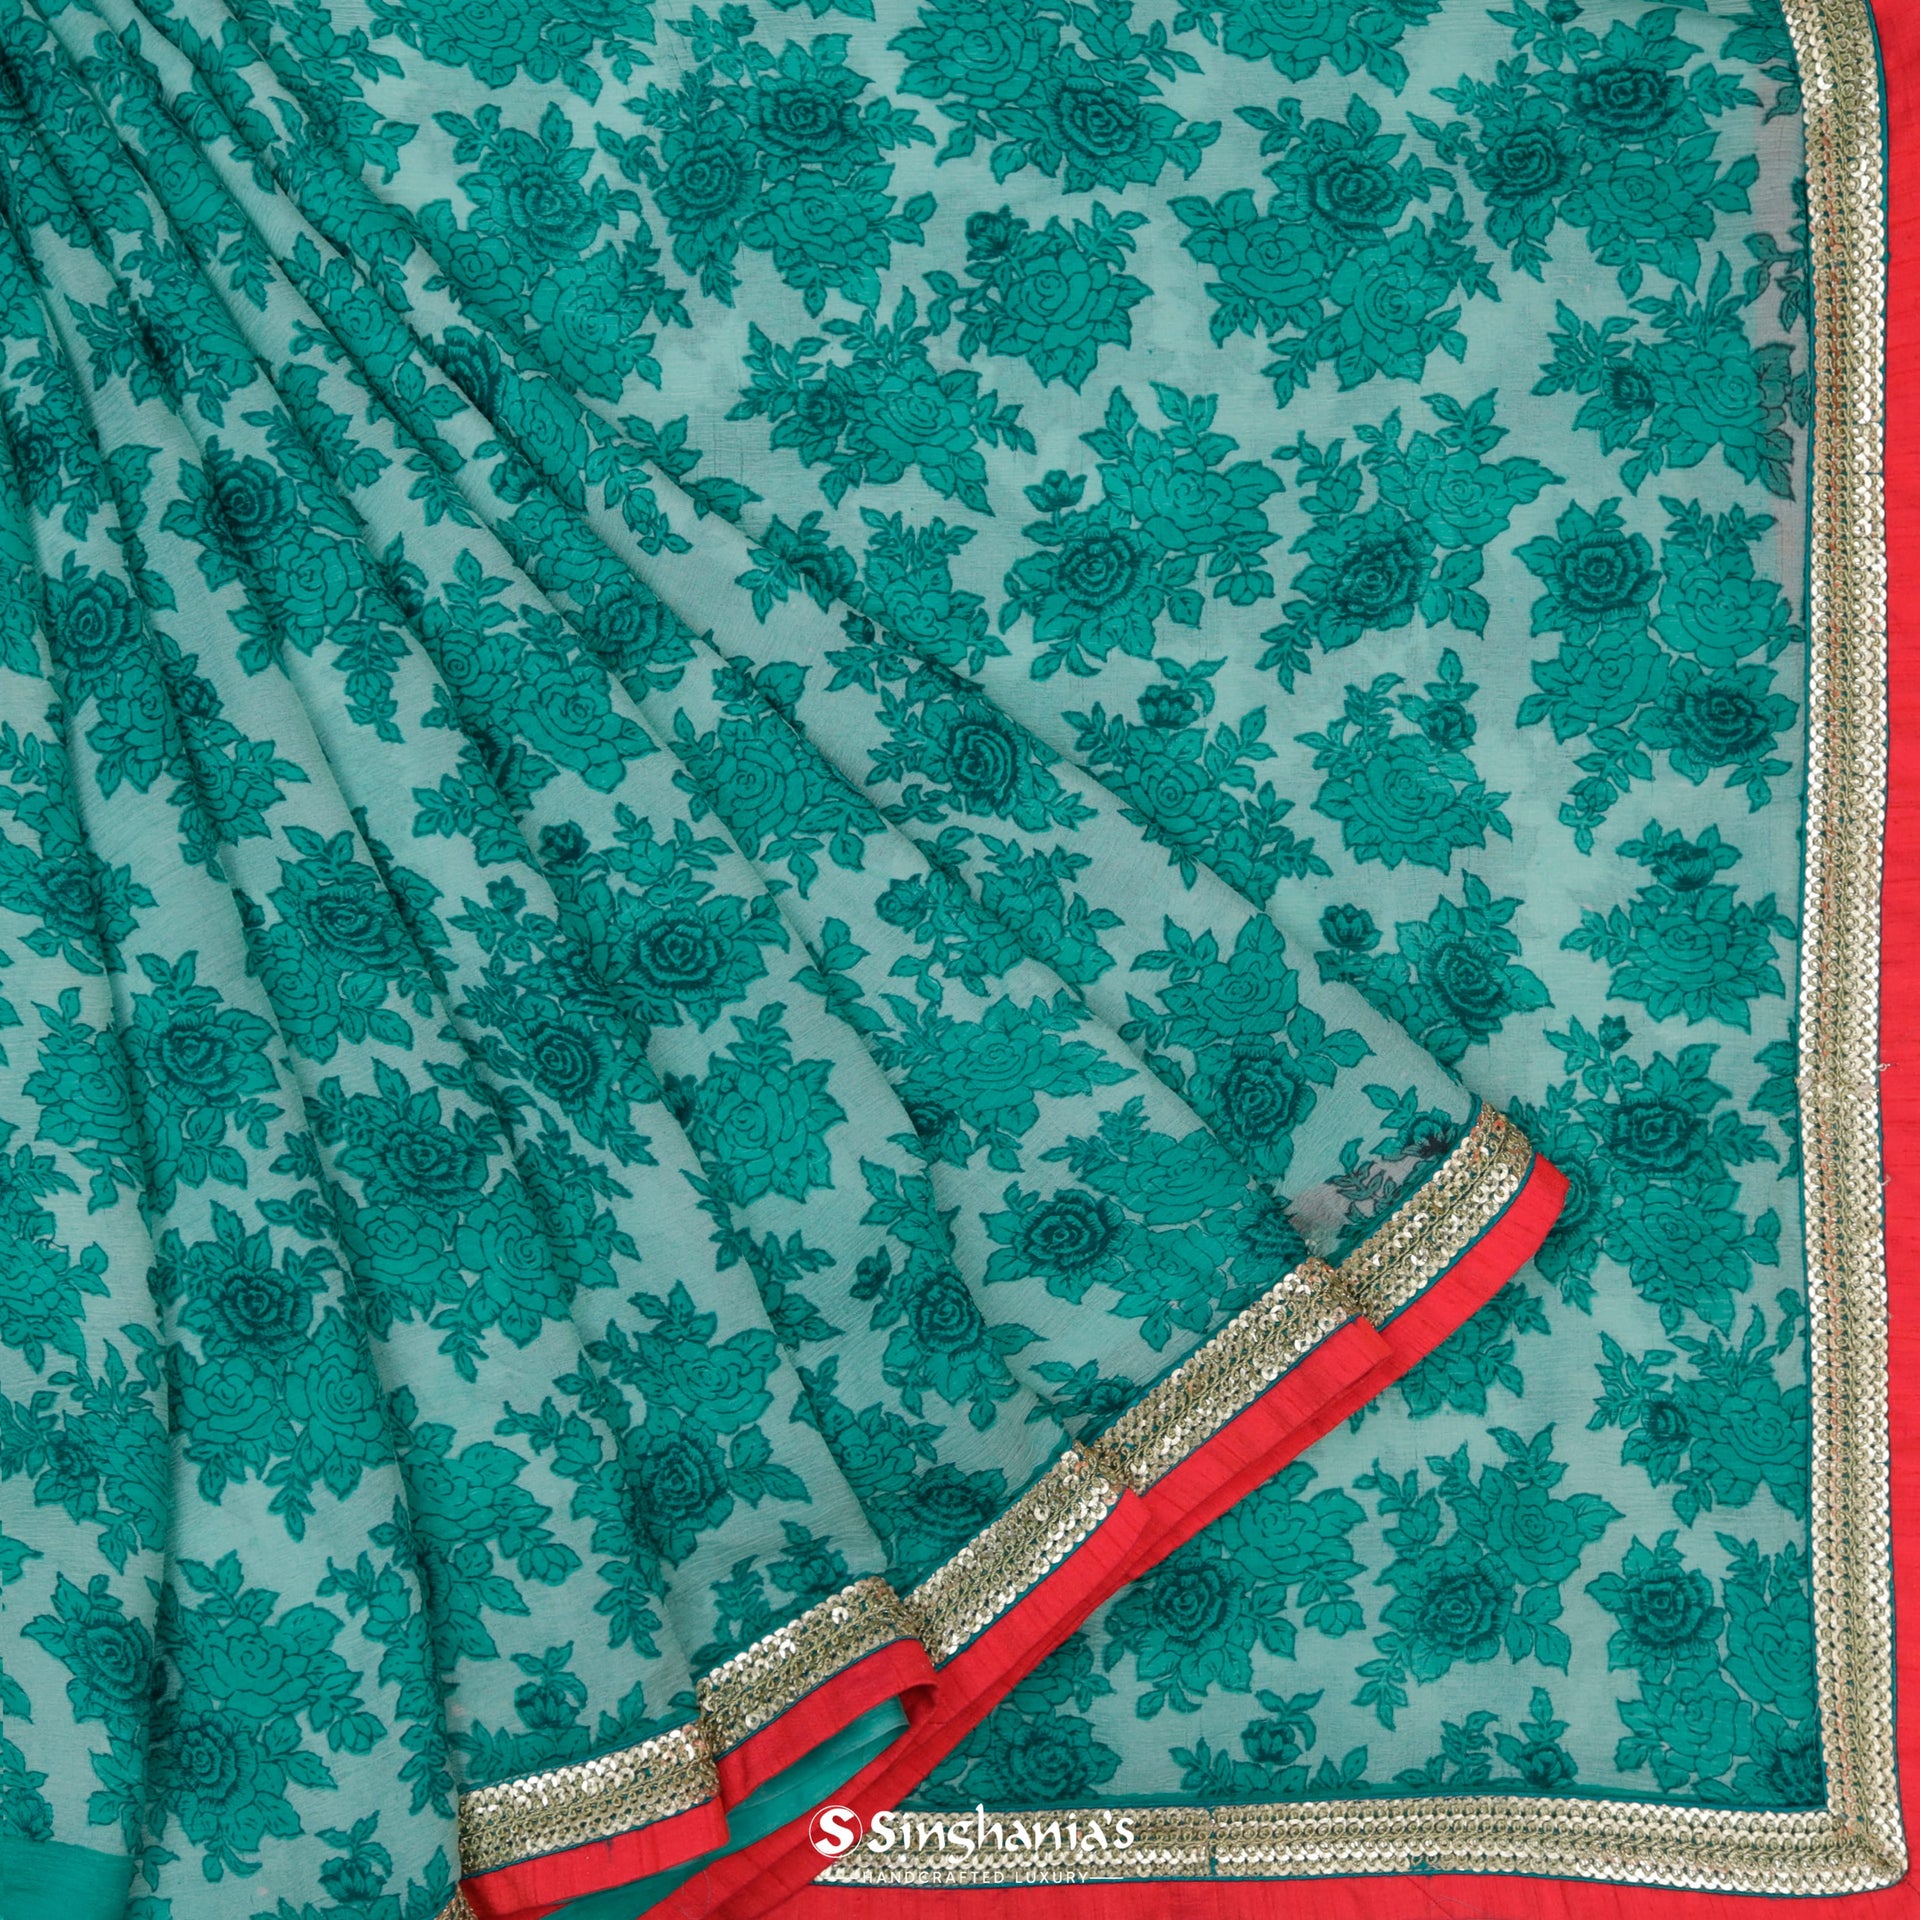 Turquoise Green Chiffon Printed Saree With Floral Motif Pattern